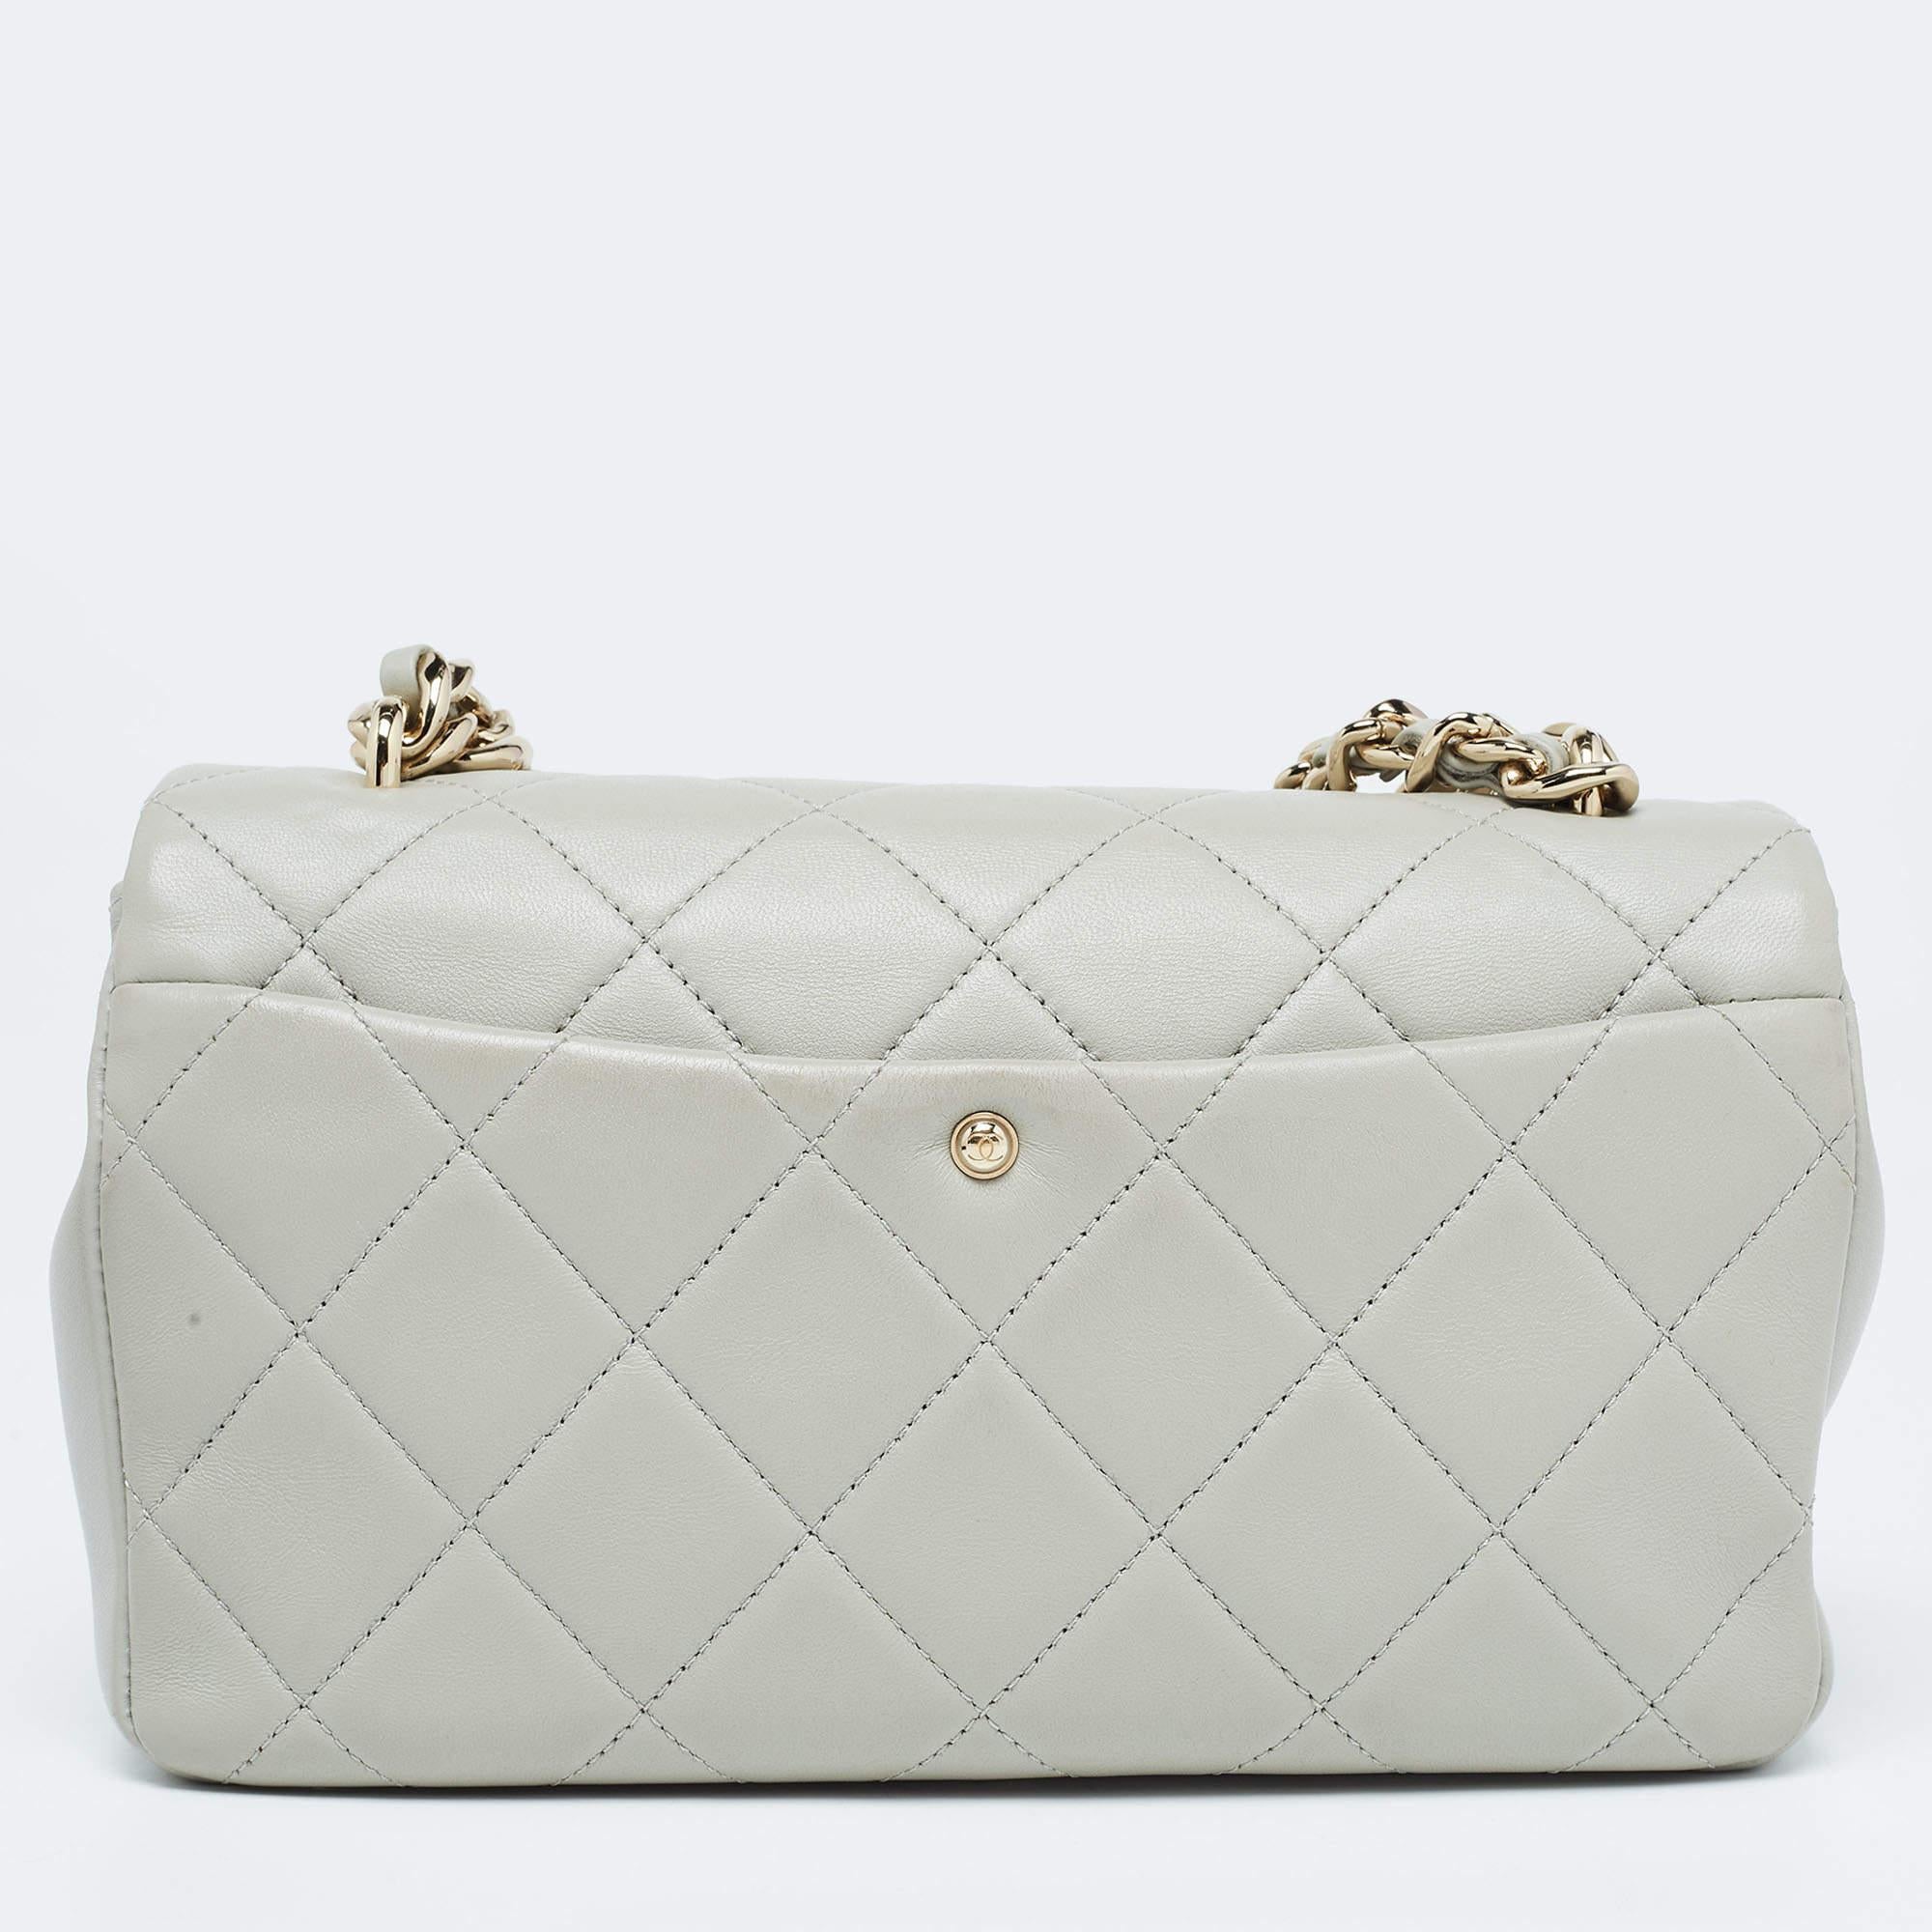 The Chanel flap bag epitomizes elegance with its luxurious combination of grey quilted leather and resin accents. The bi-color chain adds a contemporary twist to its timeless design, making it a sophisticated statement piece for any